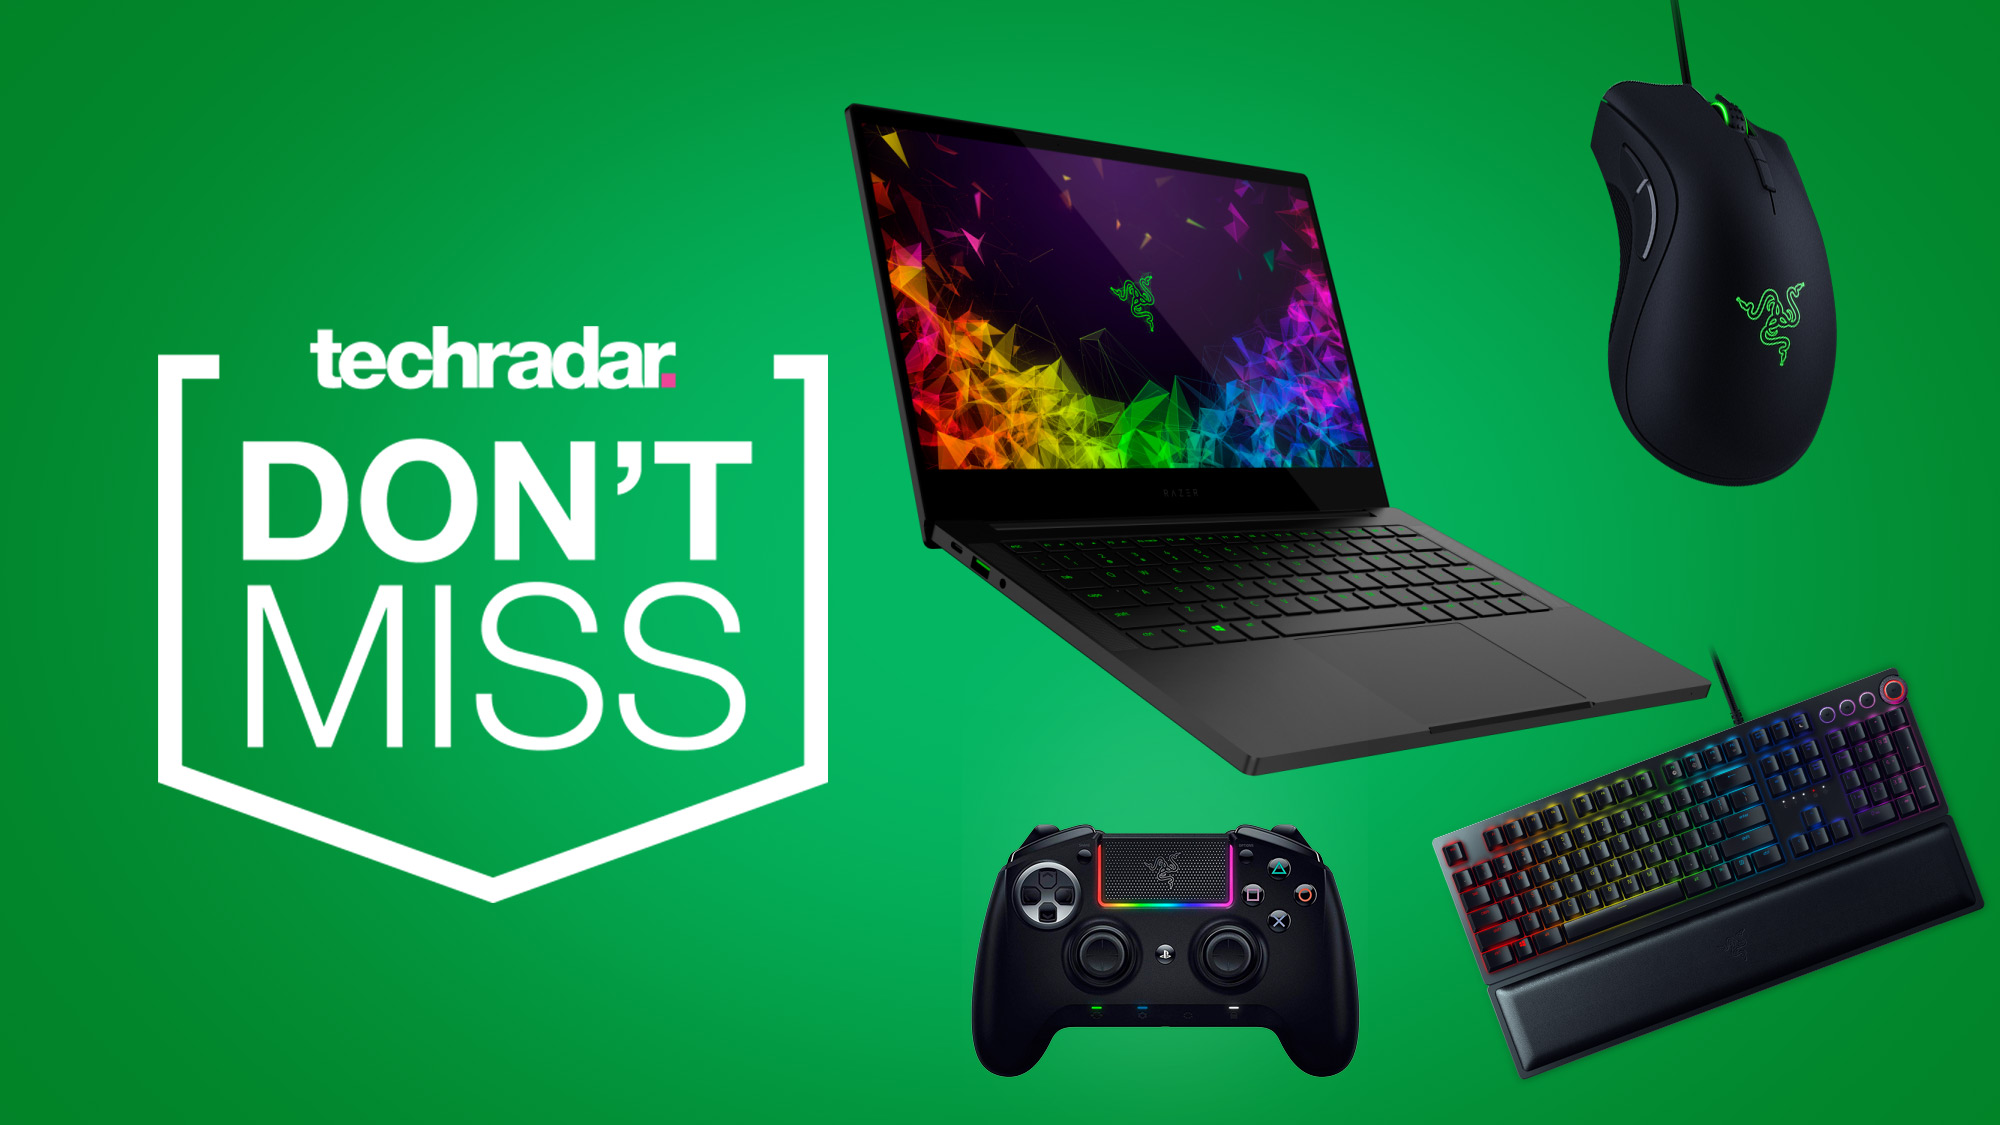 Let these Razer gaming deals set you up for 2020 in style: cheap Razer keyboards, mice, and laptops